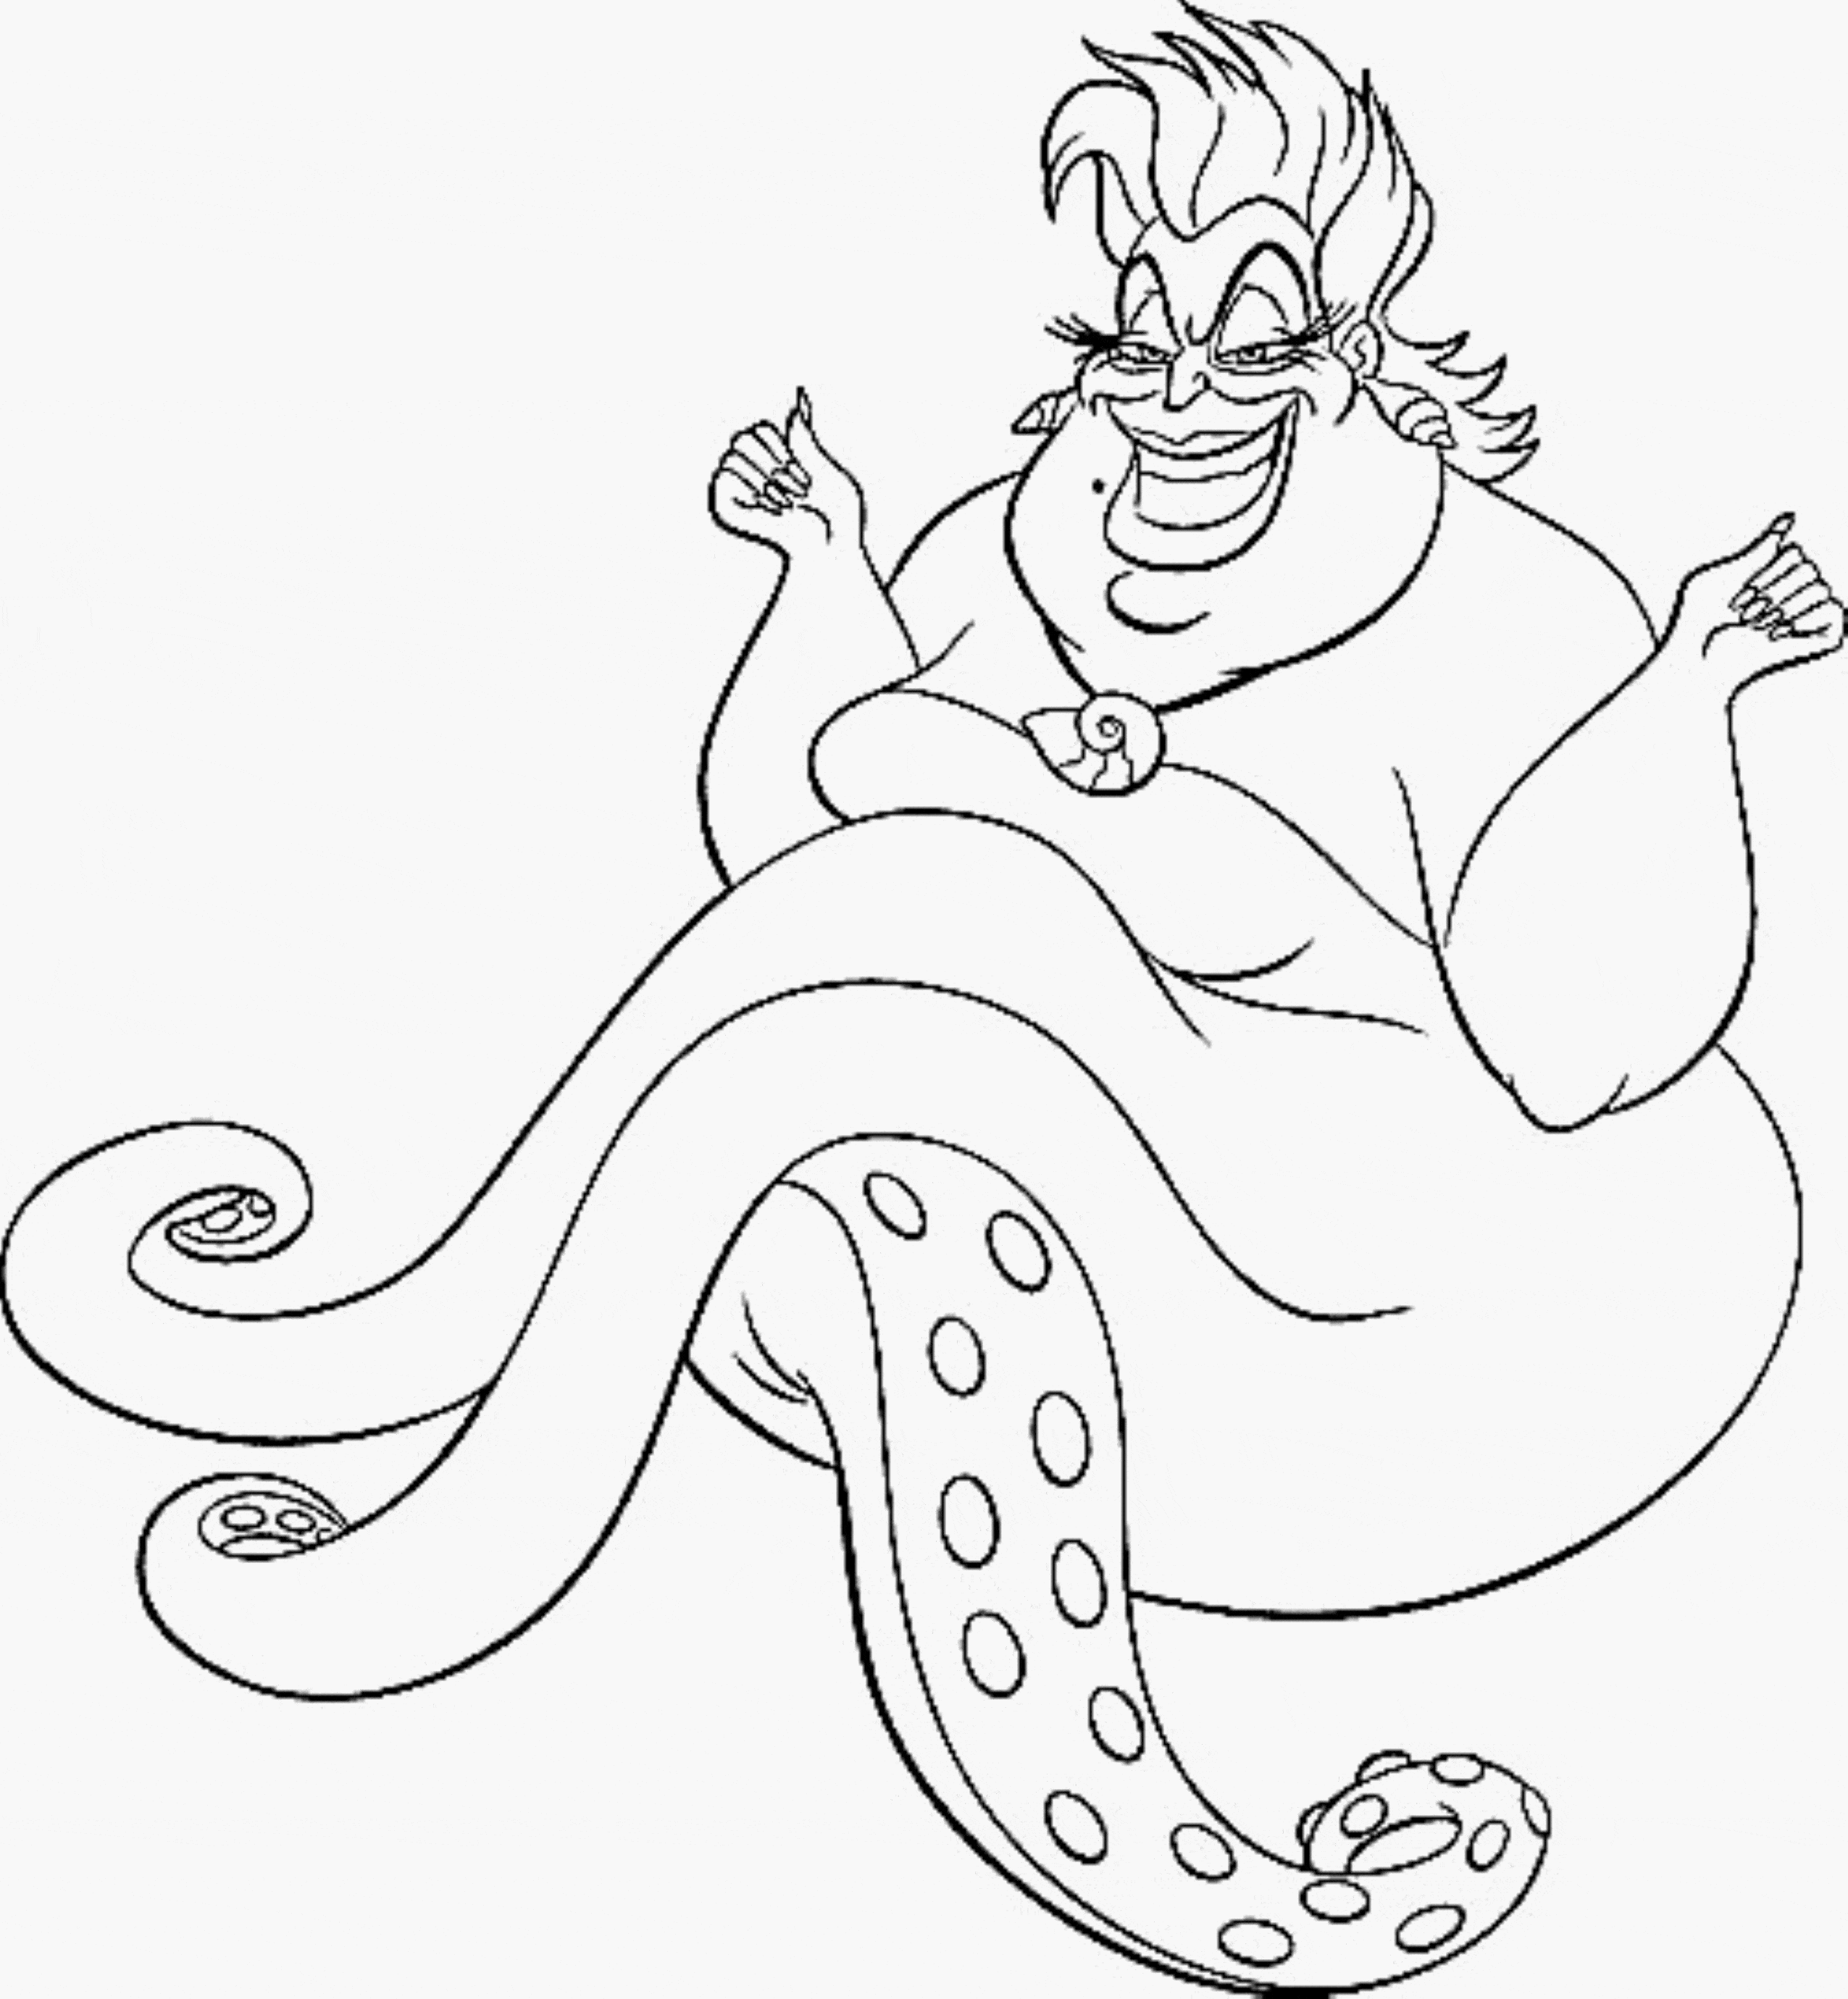 Print & Download - Find the Suitable Little Mermaid  